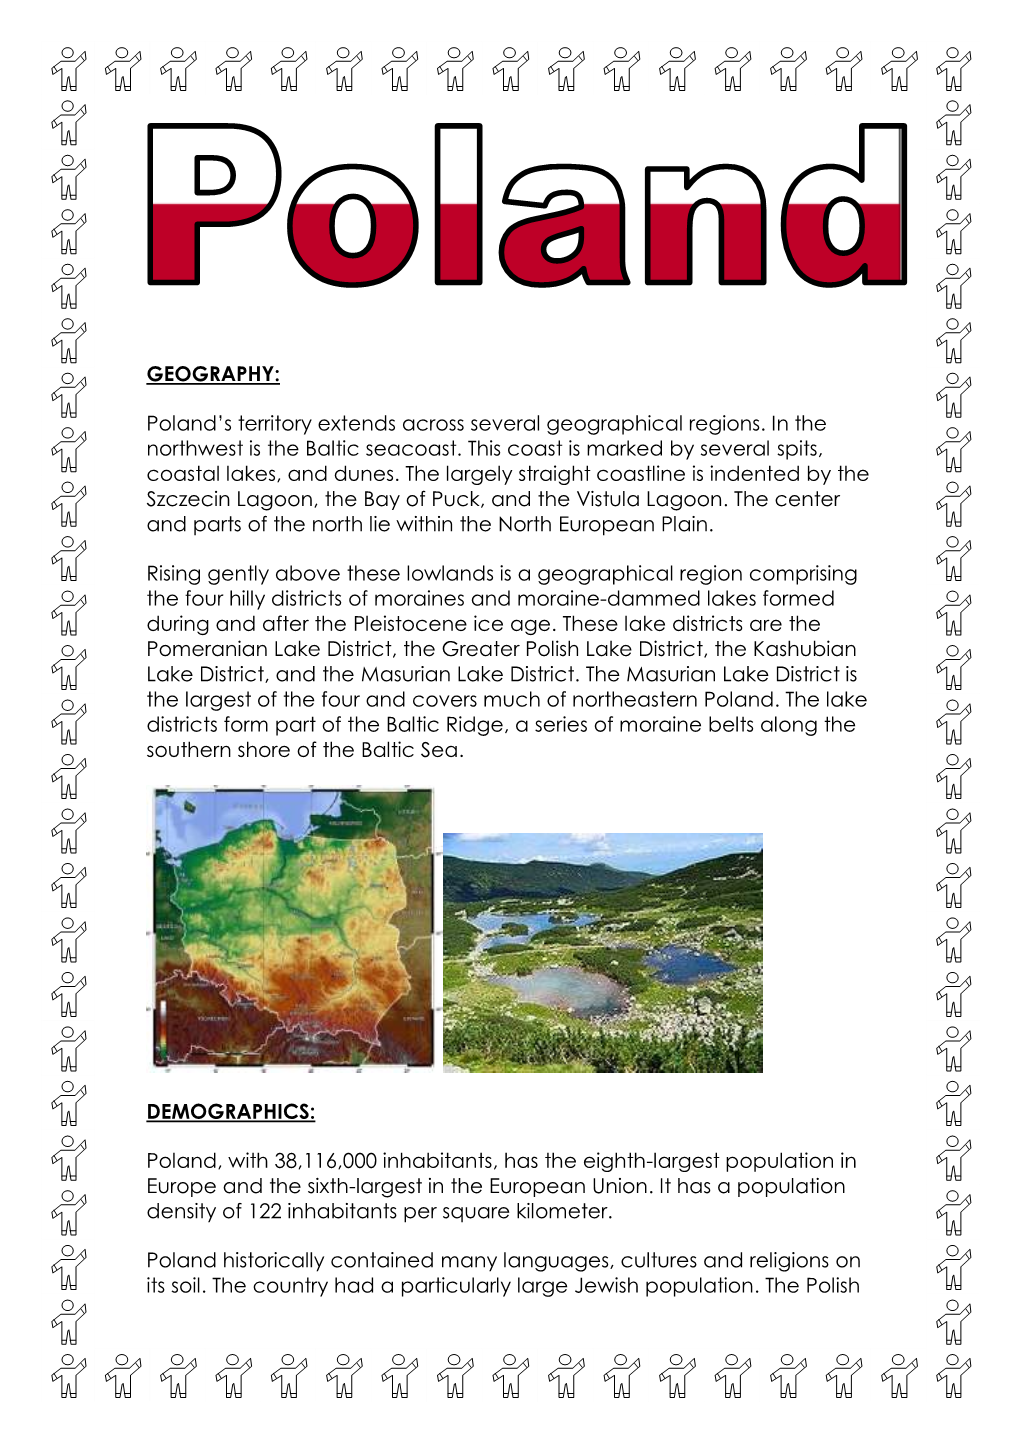 GEOGRAPHY: Poland's Territory Extends Across Several Geographical Regions. in the Northwest Is the Baltic Seacoast. This Coast